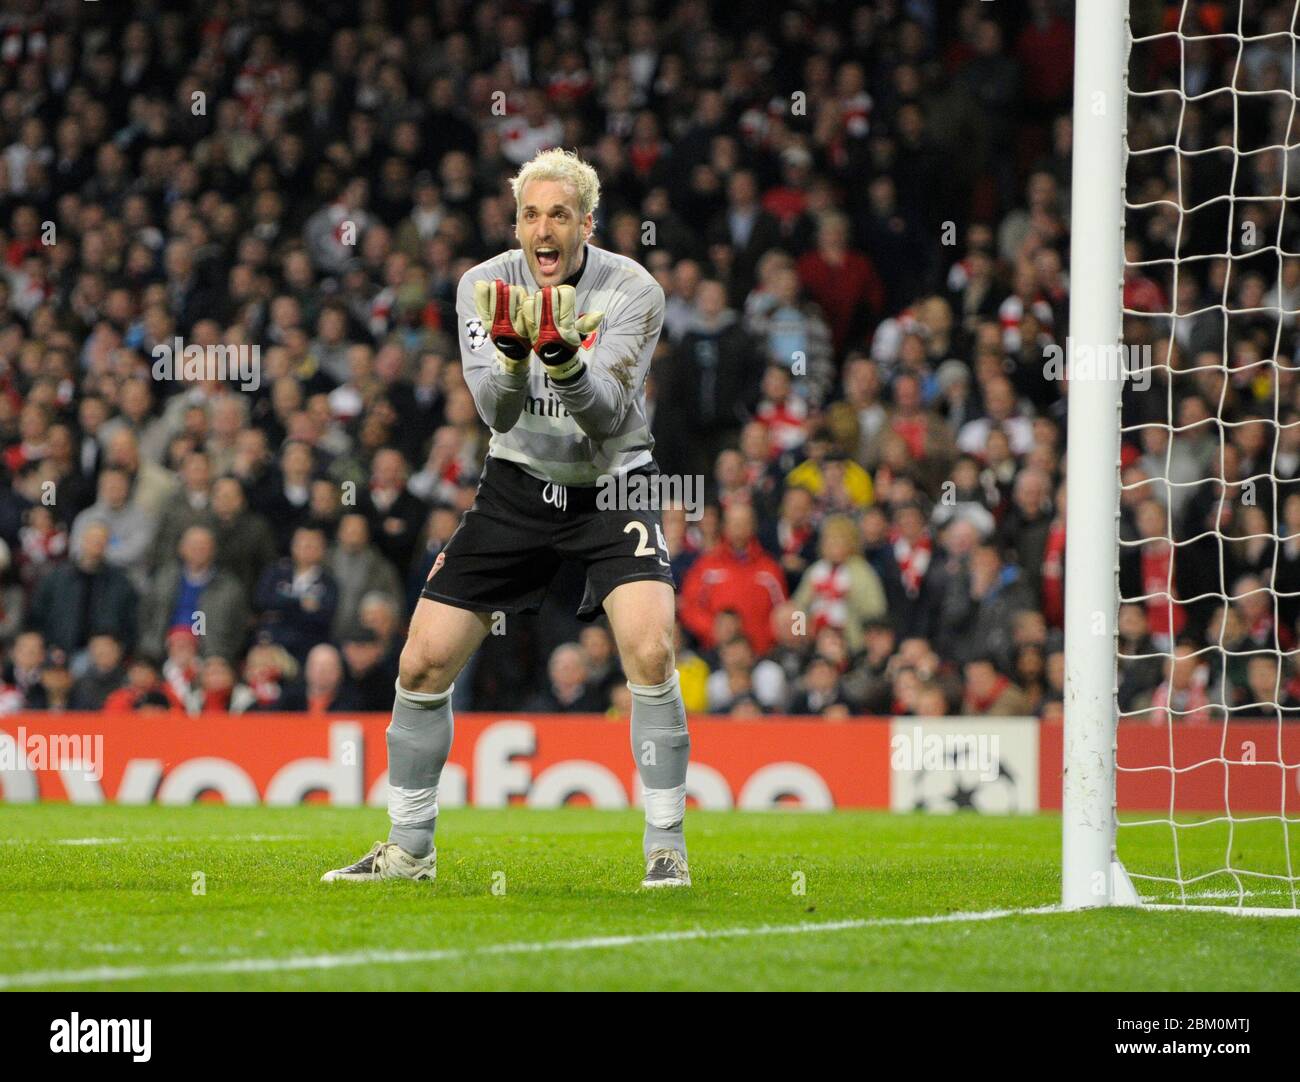 LONDON, UK APRIL 02: Manuel Almunia of Arsenal in action  during UEFA Champion League Quarter Final 1st Leg between Arsenal and Liverpool at Emirates Stock Photo